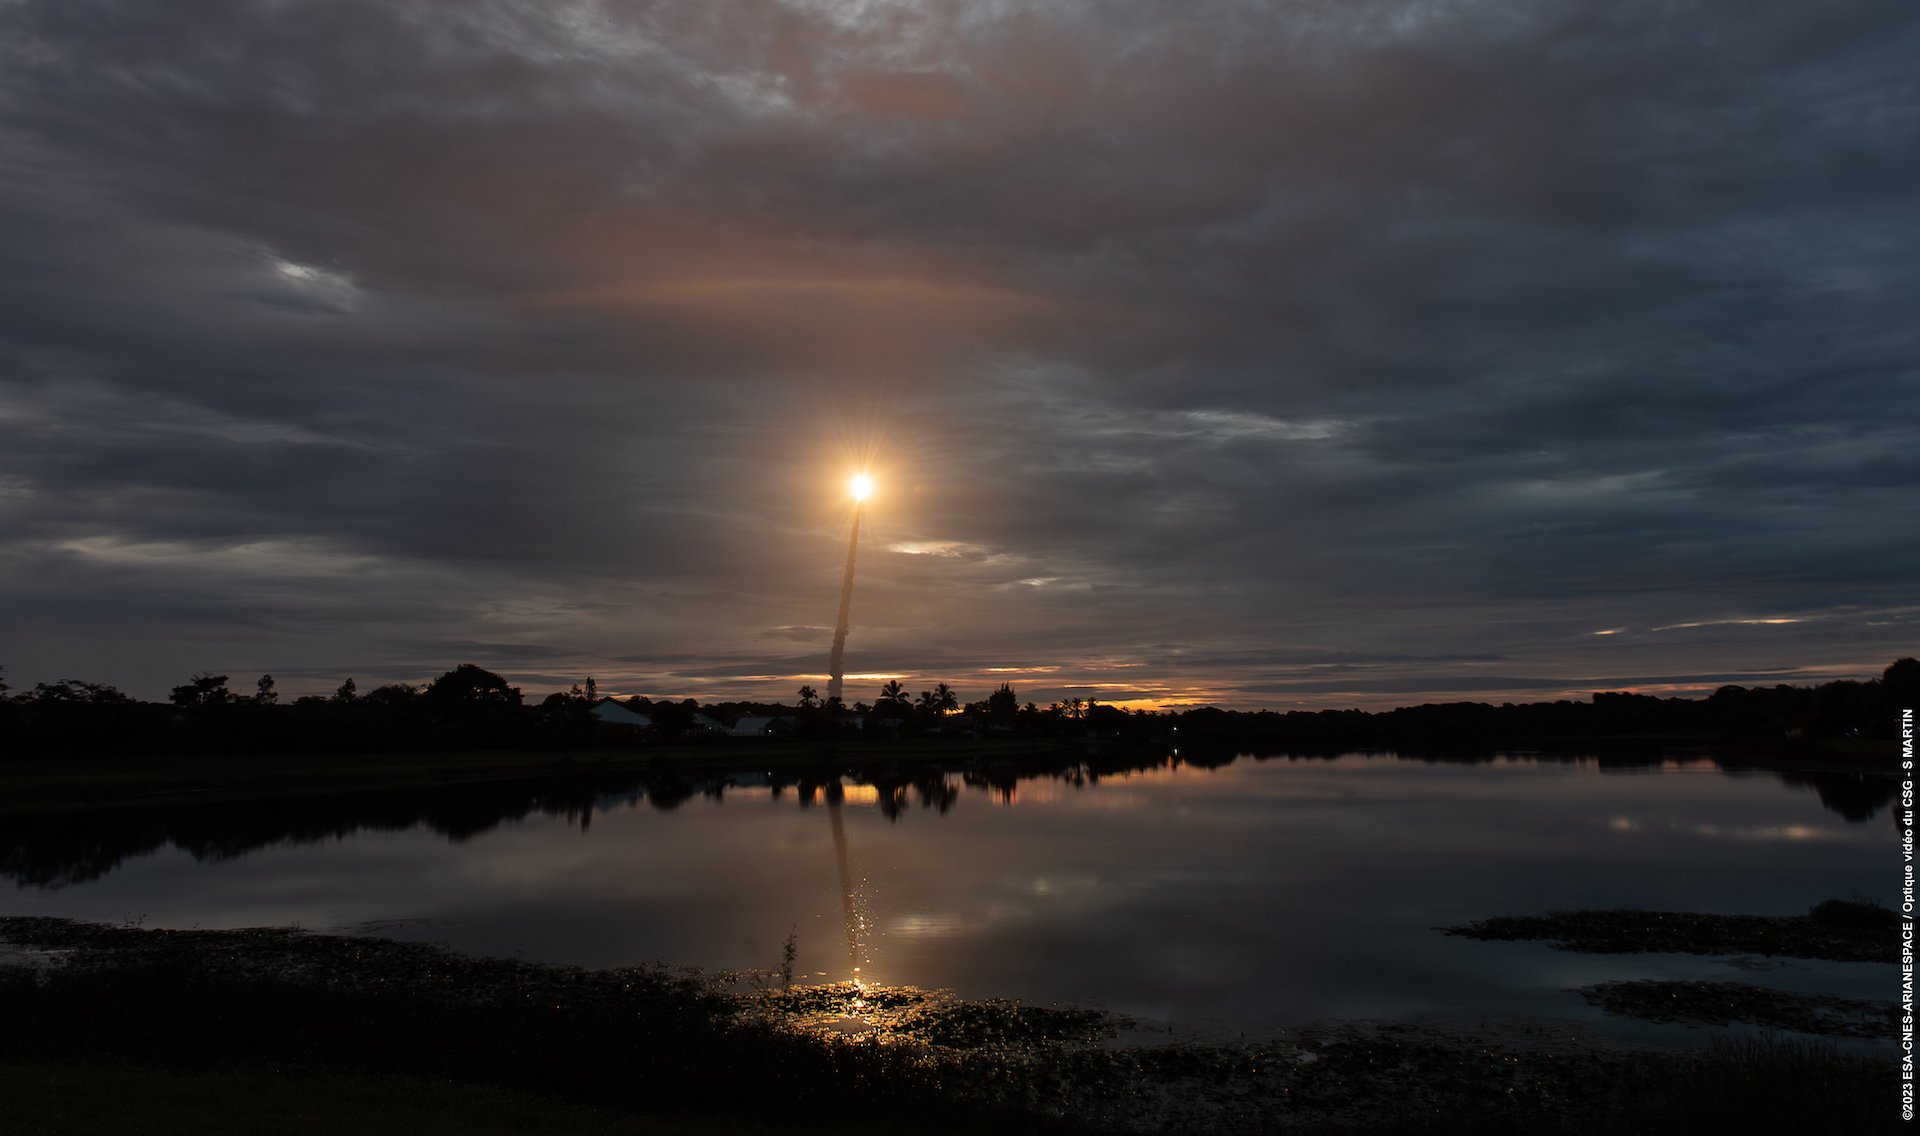 Breaking News Ariane 5 VA261 brightens a cloudy sky dazzling after sunset at Europe's Spaceport in French Guiana on 5 July 2023.